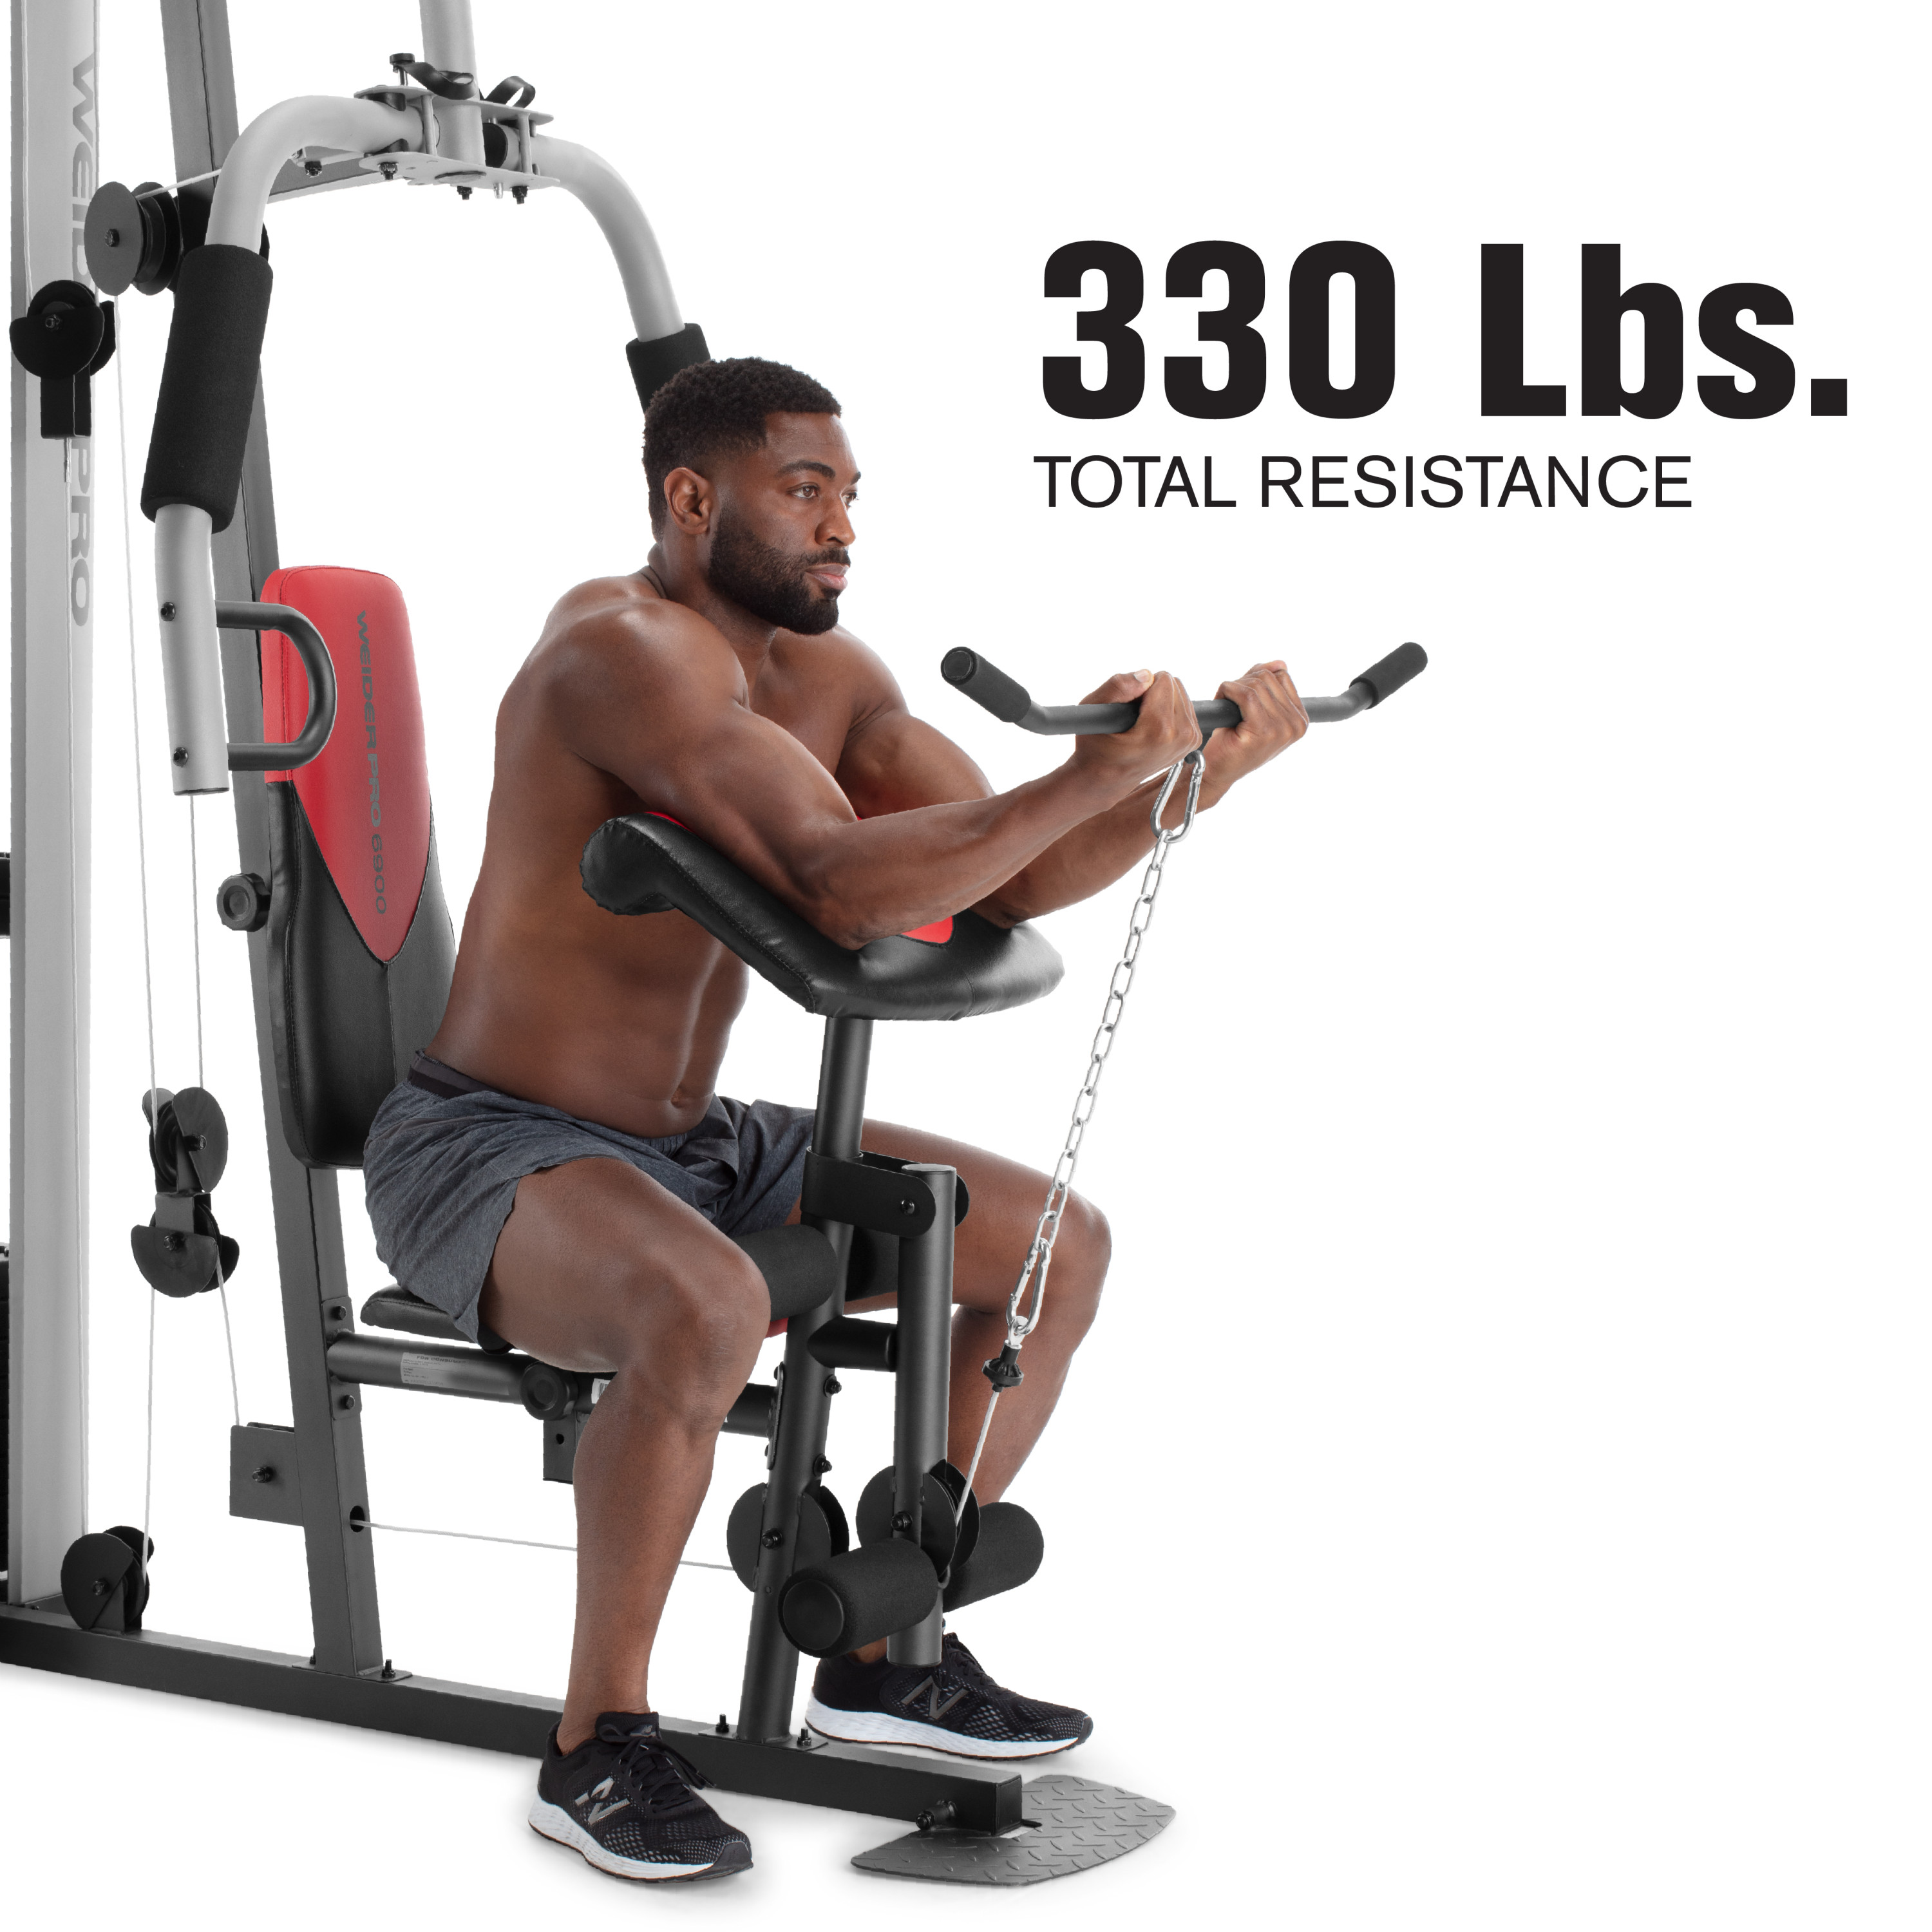 Weider Pro 6900 Home Gym System with 125 Lb. Weight Stack - image 5 of 39